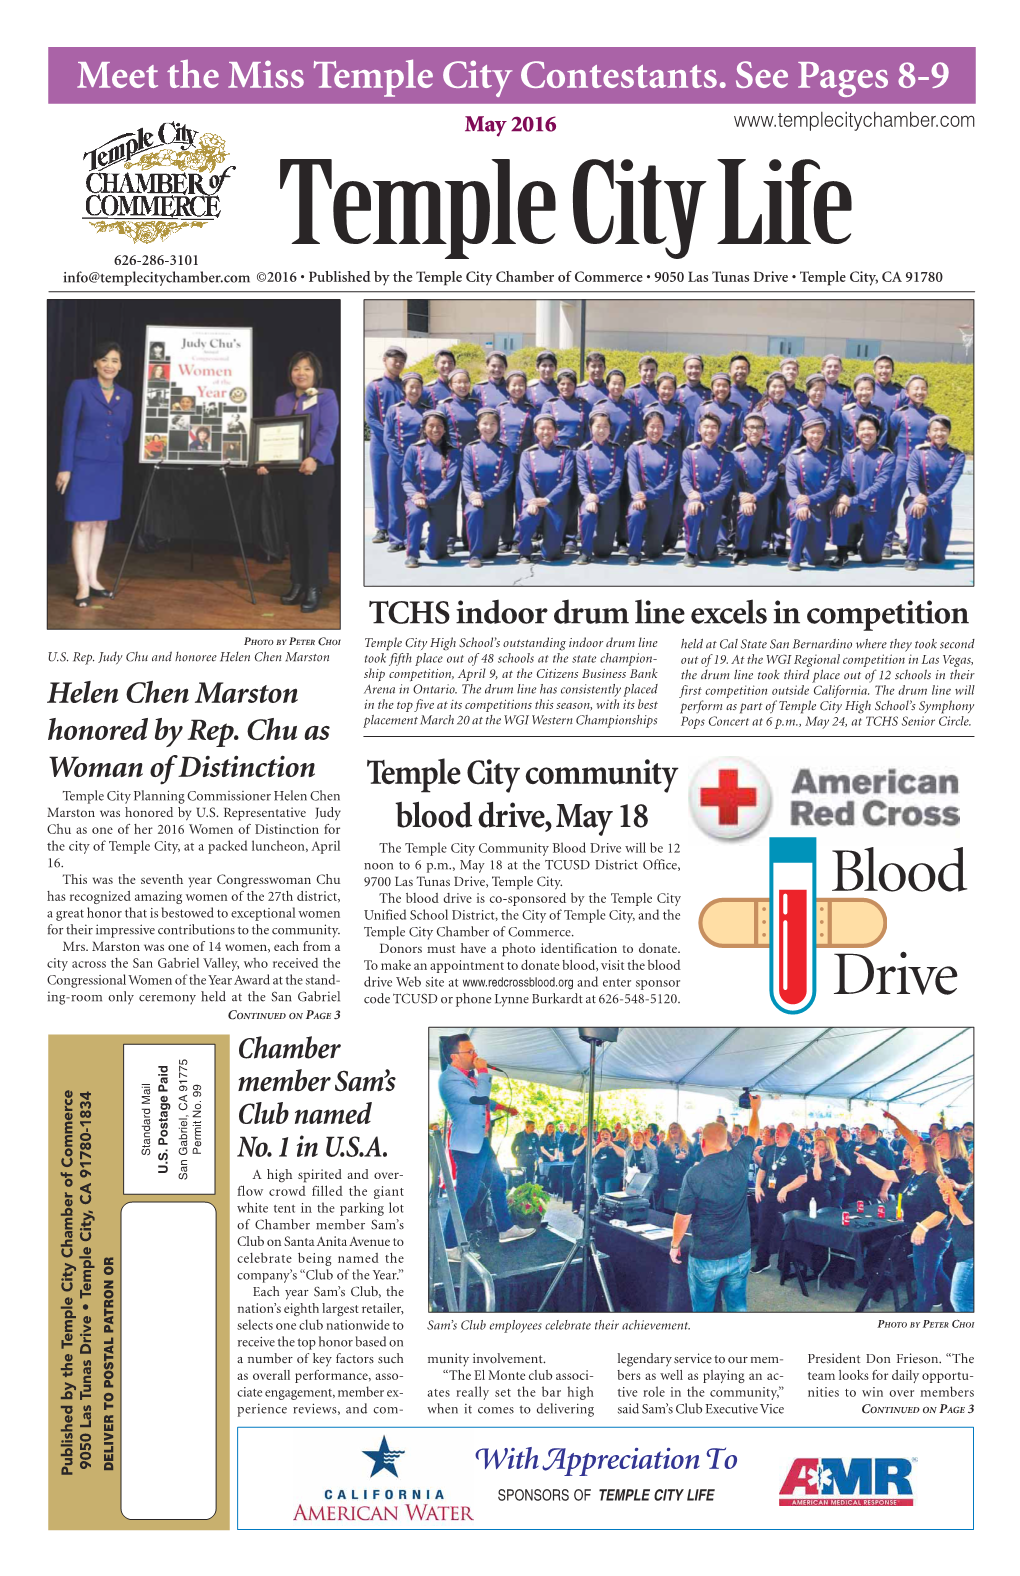 Blood Drive, May 18 the City of Temple City, at a Packed Luncheon, April the Temple City Community Blood Drive Will Be 12 16